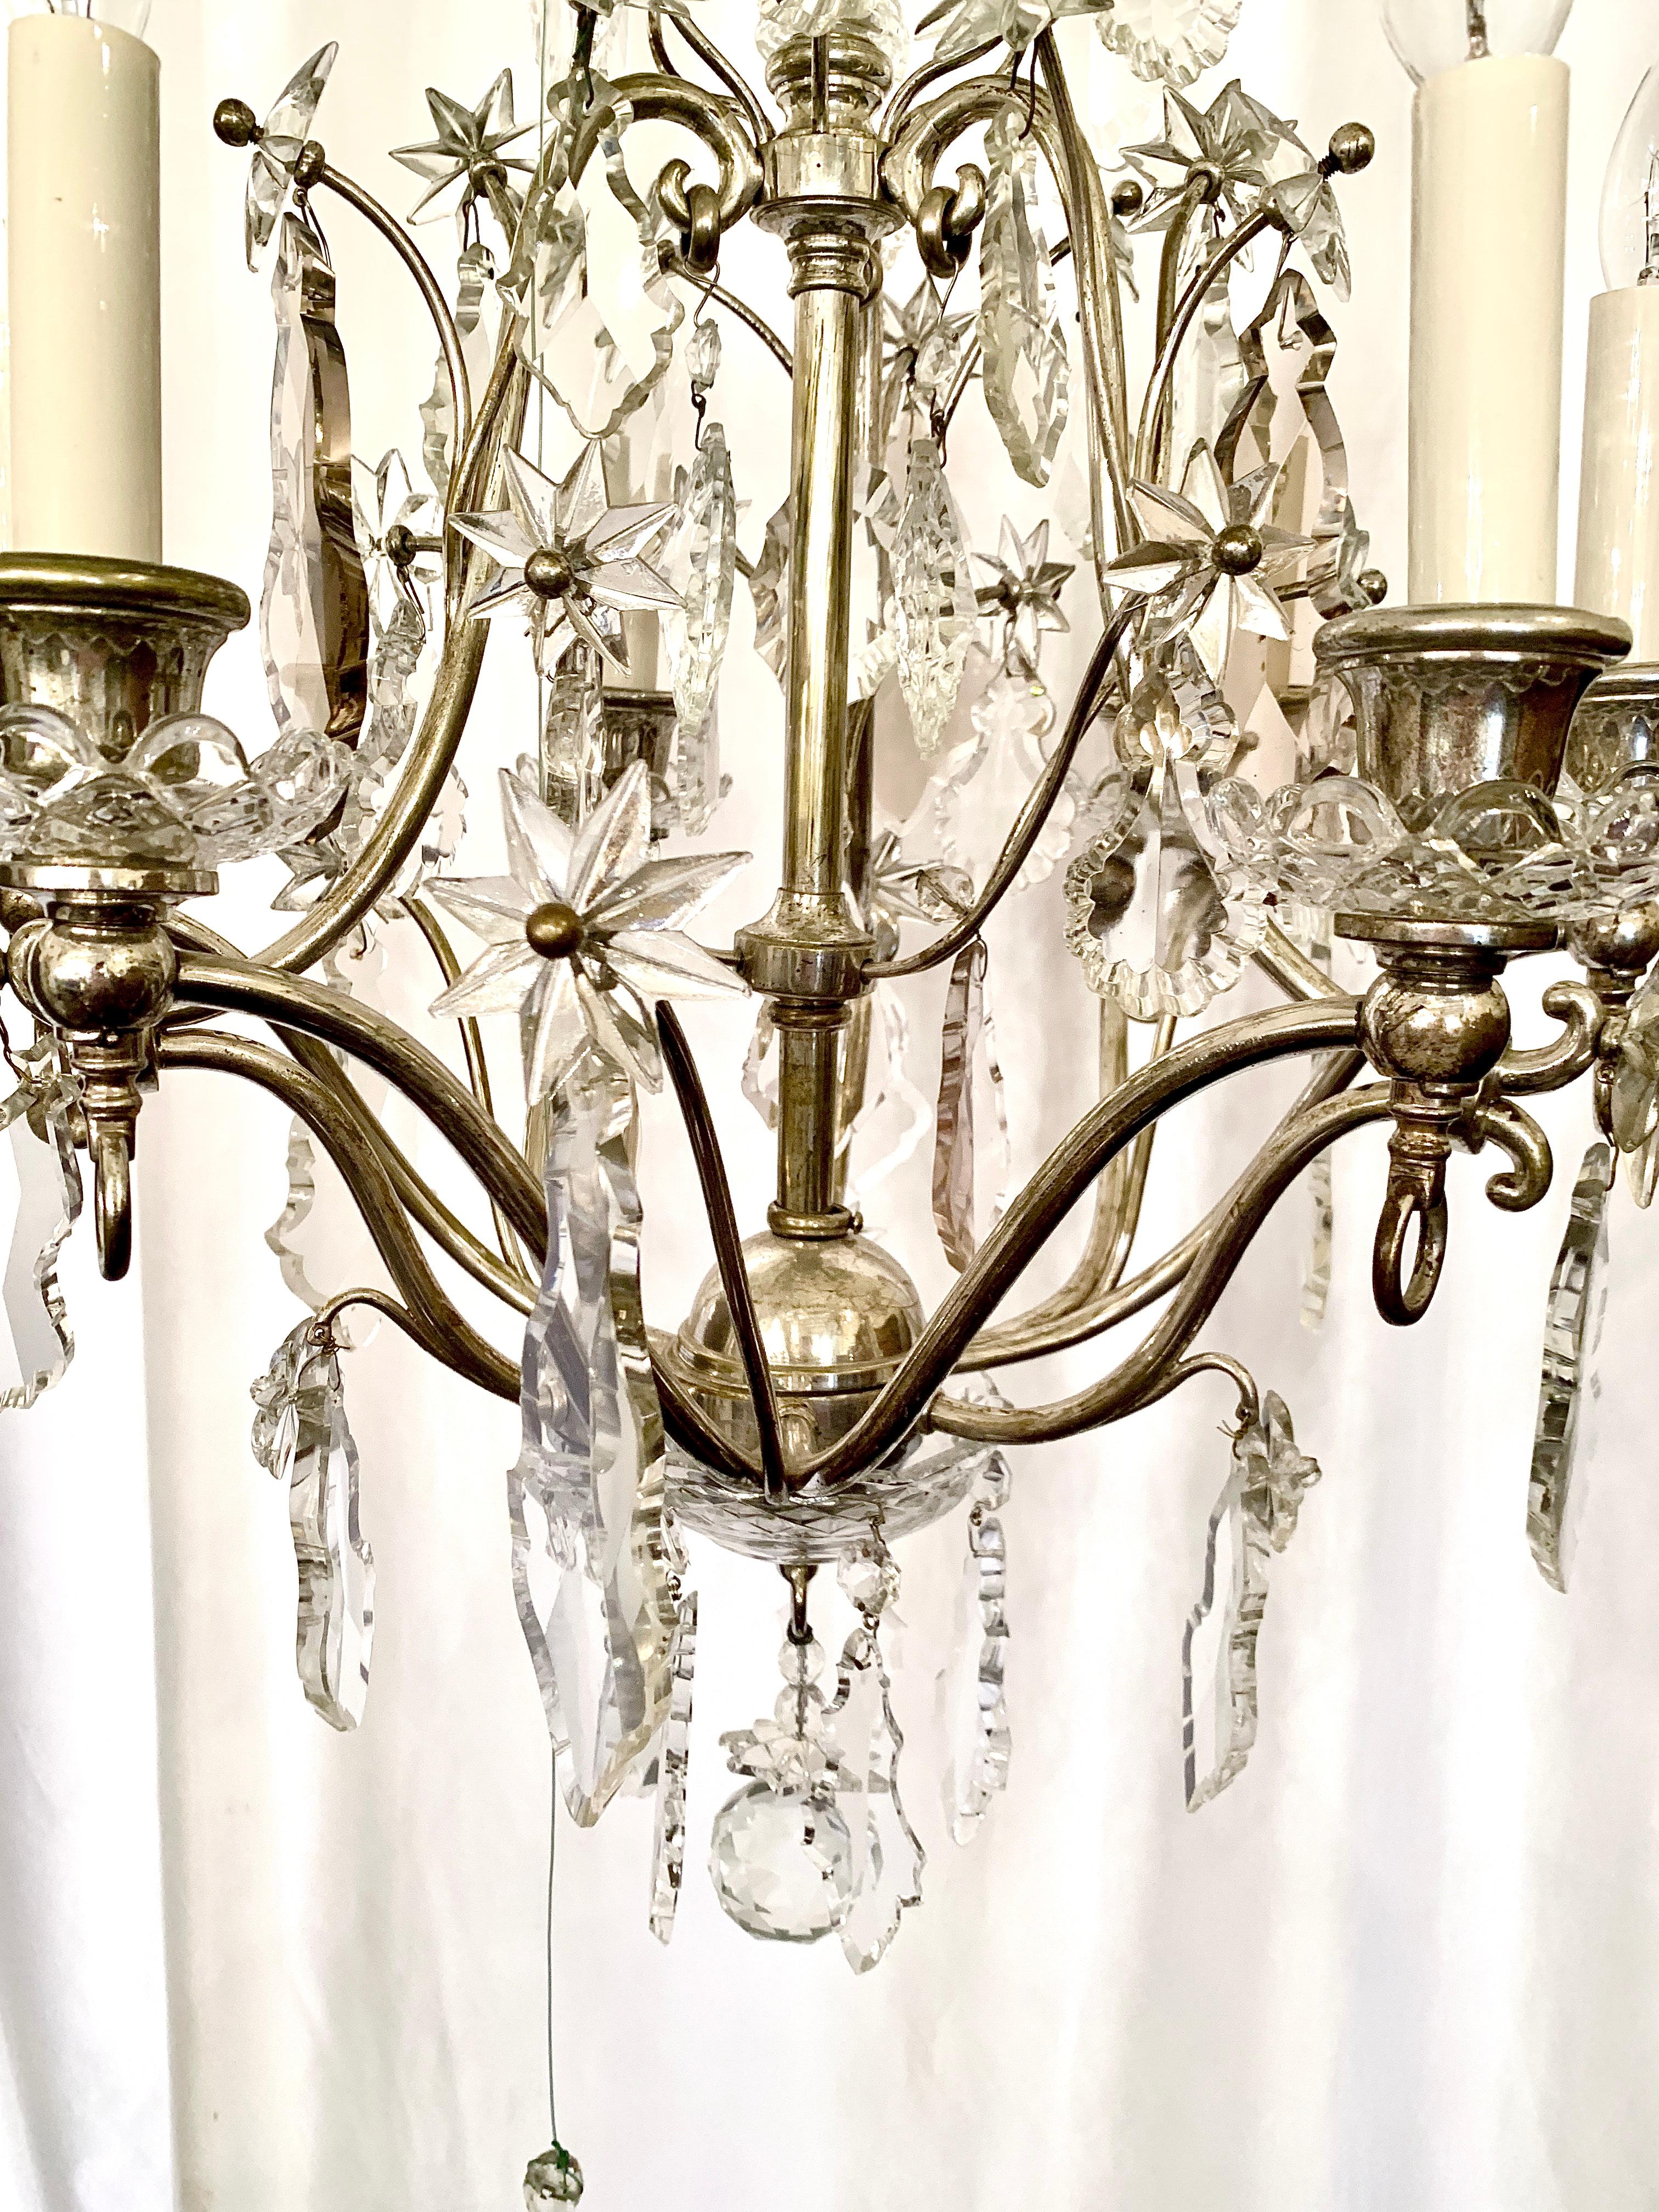 20th Century Antique French Baccarat Crystal Silvered Bronze Chandelier, Circa 1900-1920 For Sale